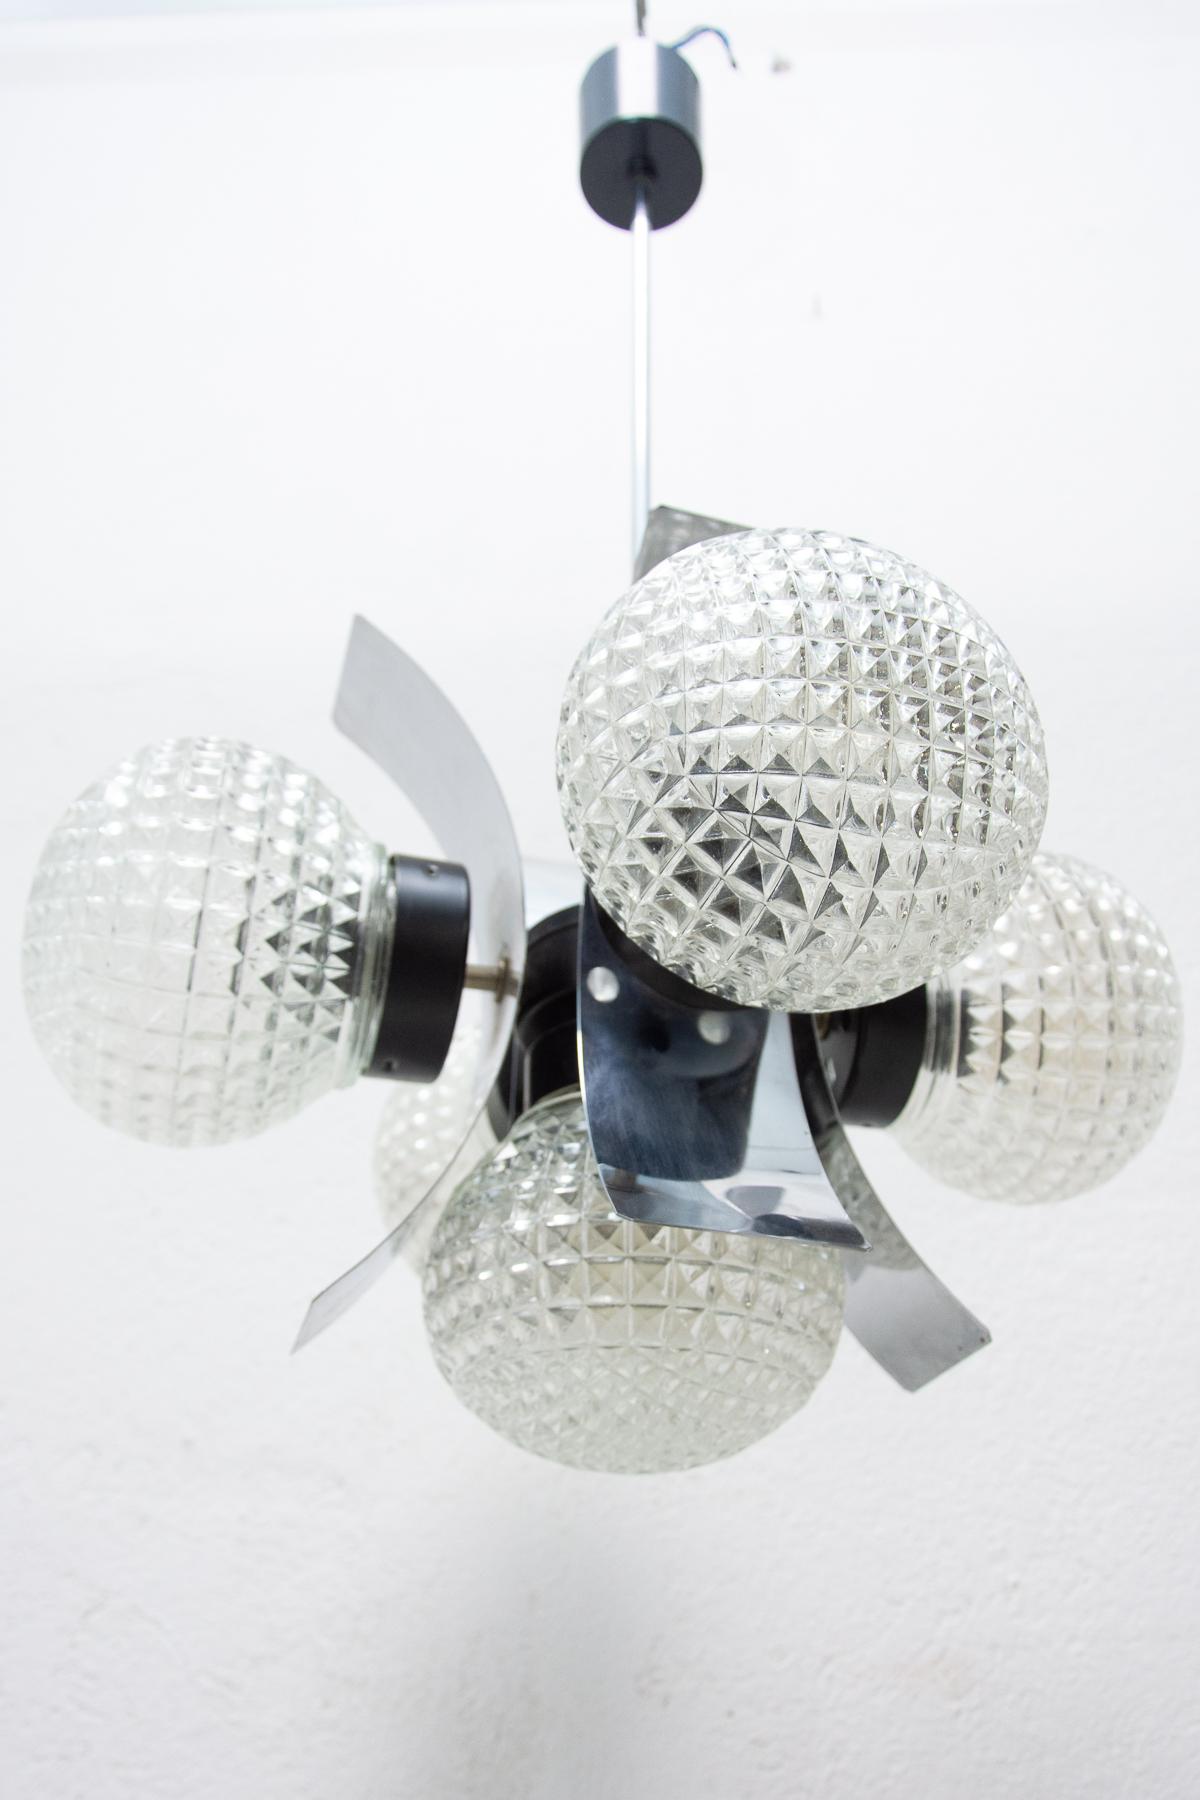 Cut Glass Eastern Bloc Brutalist Pendant Lamp from the 1970s, Czechoslovakia For Sale